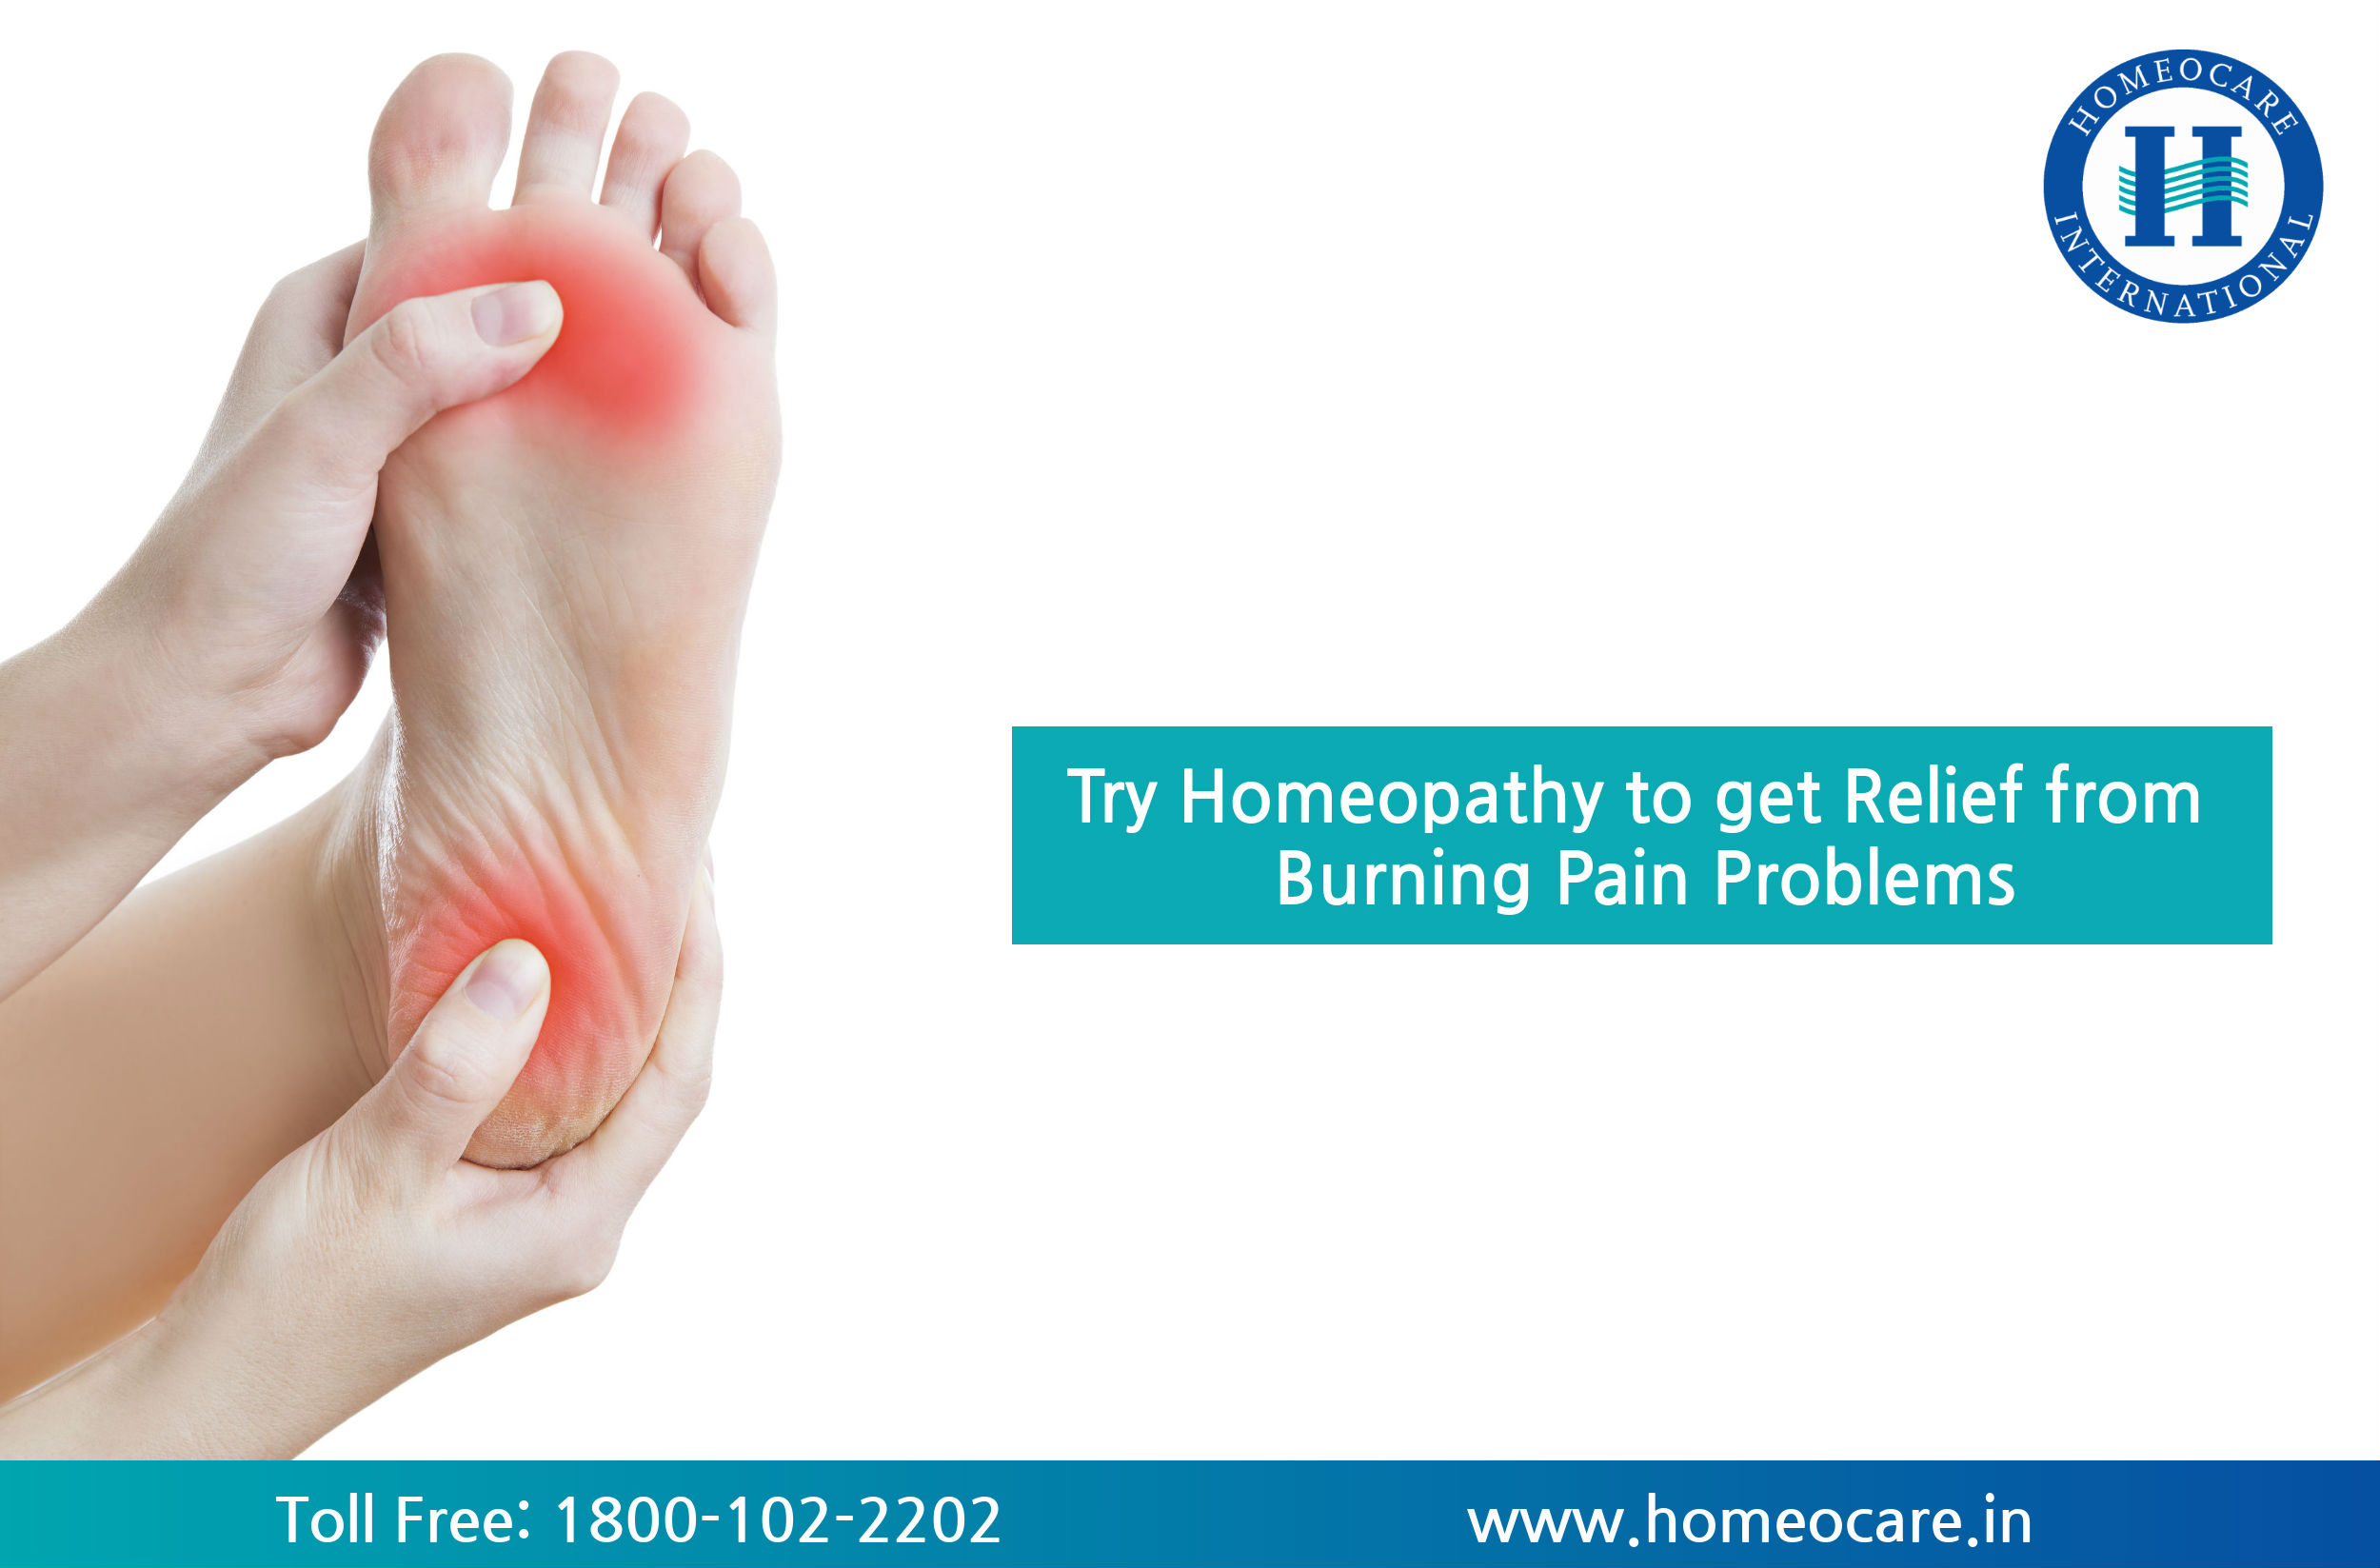 Burning foot pain problems can controlled by Homeopathy